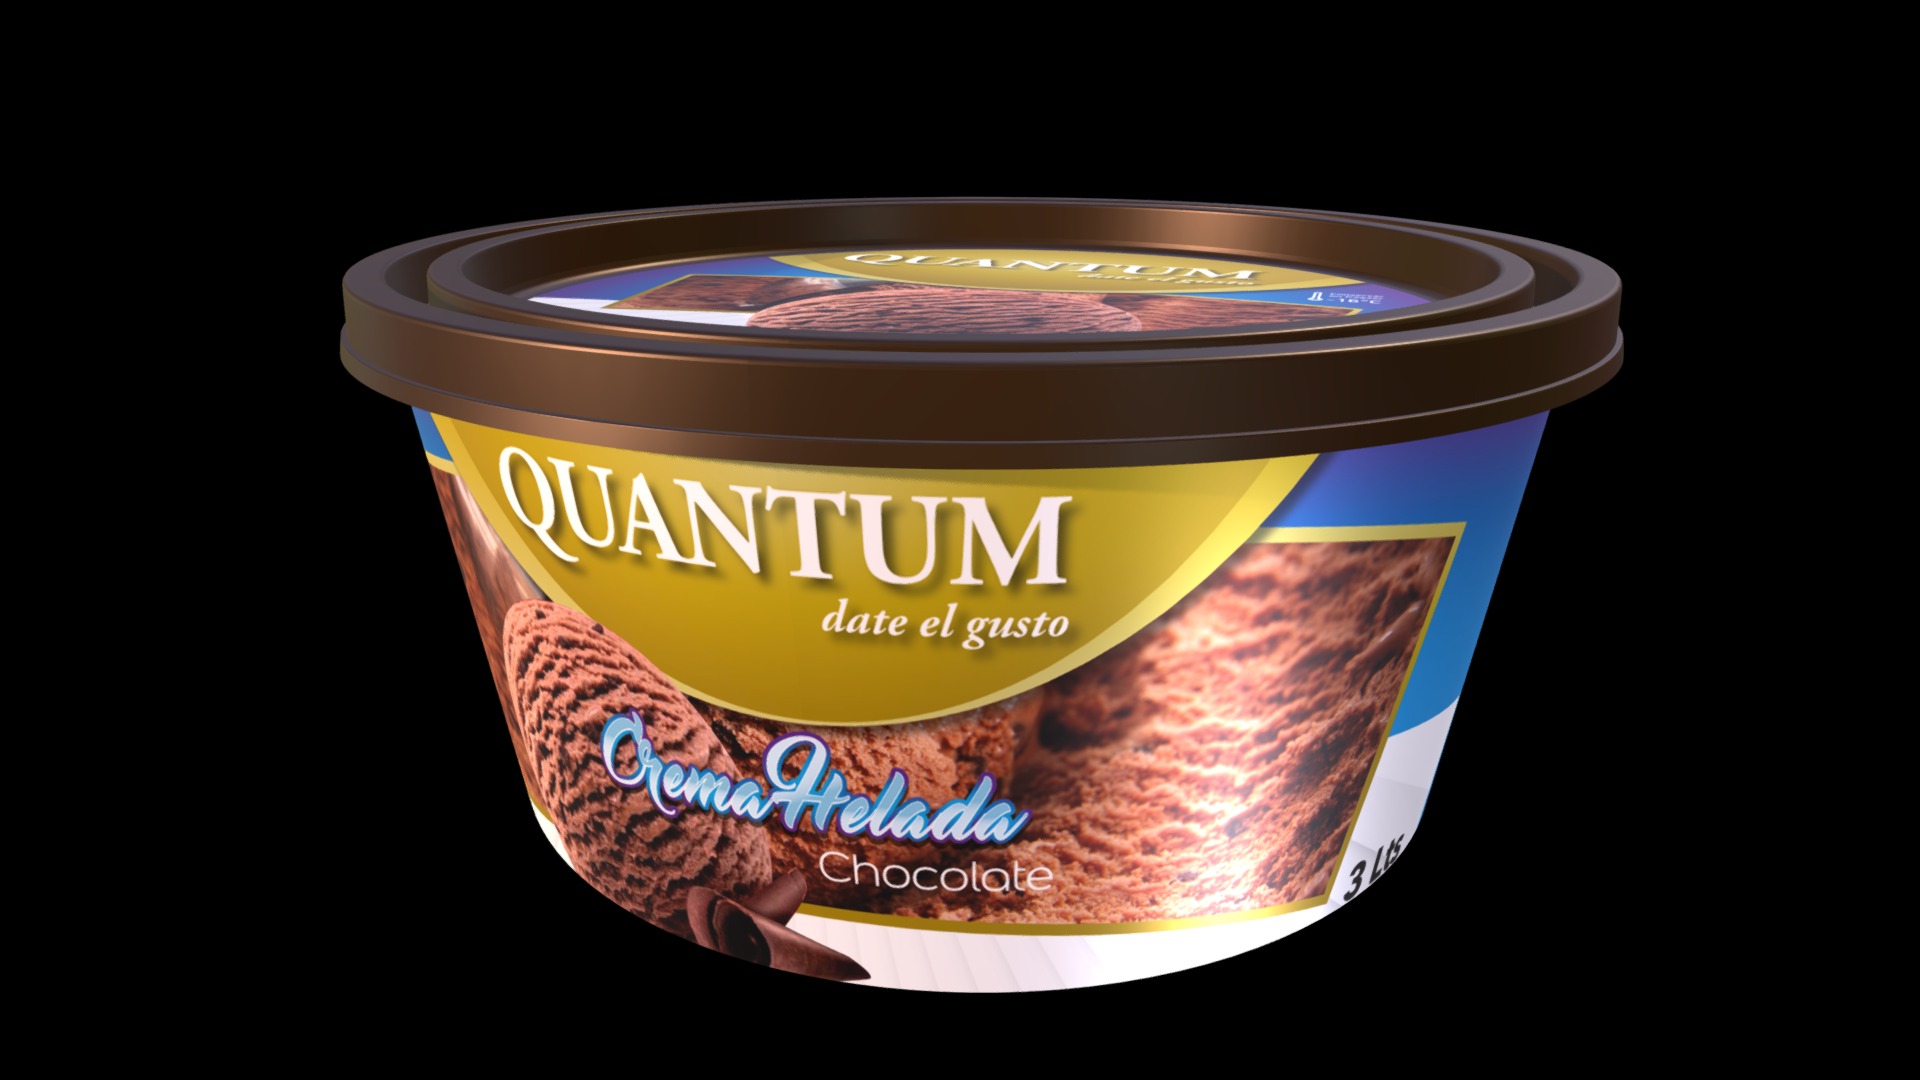 3D model Quantum - This is a 3D model of the Quantum. The 3D model is about a can of food.